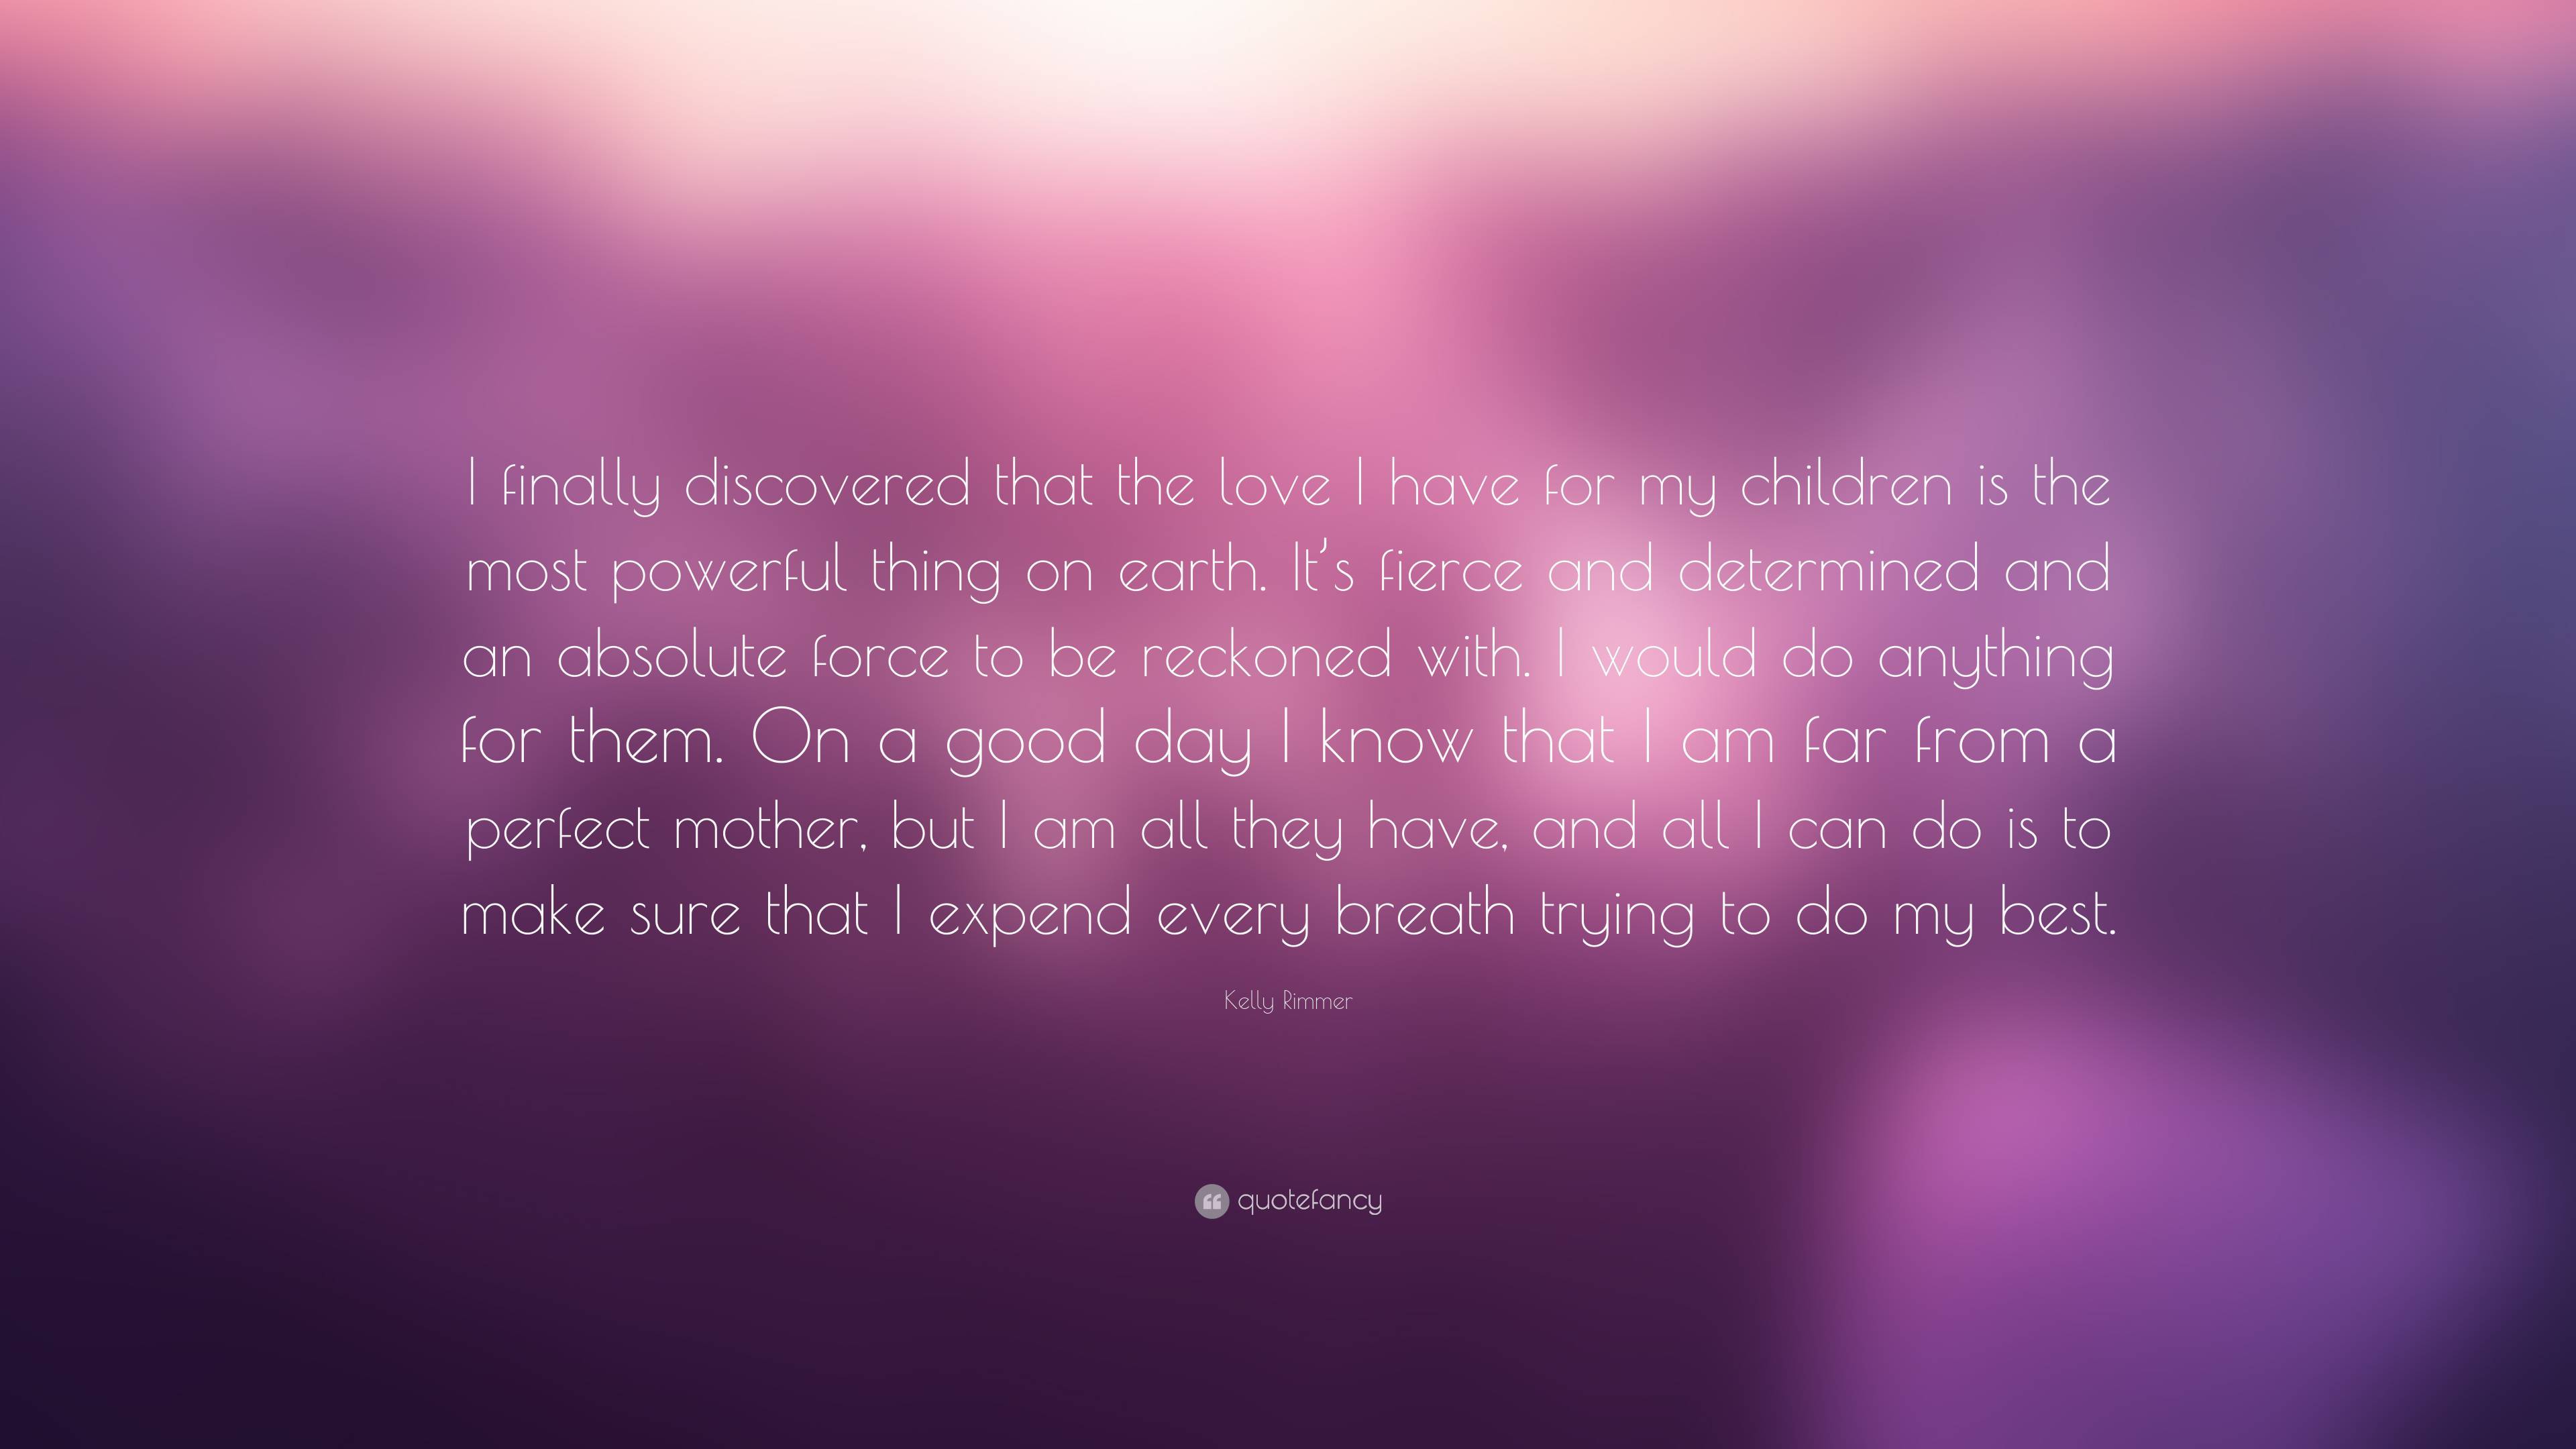 Kelly Rimmer Quote: “I finally discovered that the love I have for my ...